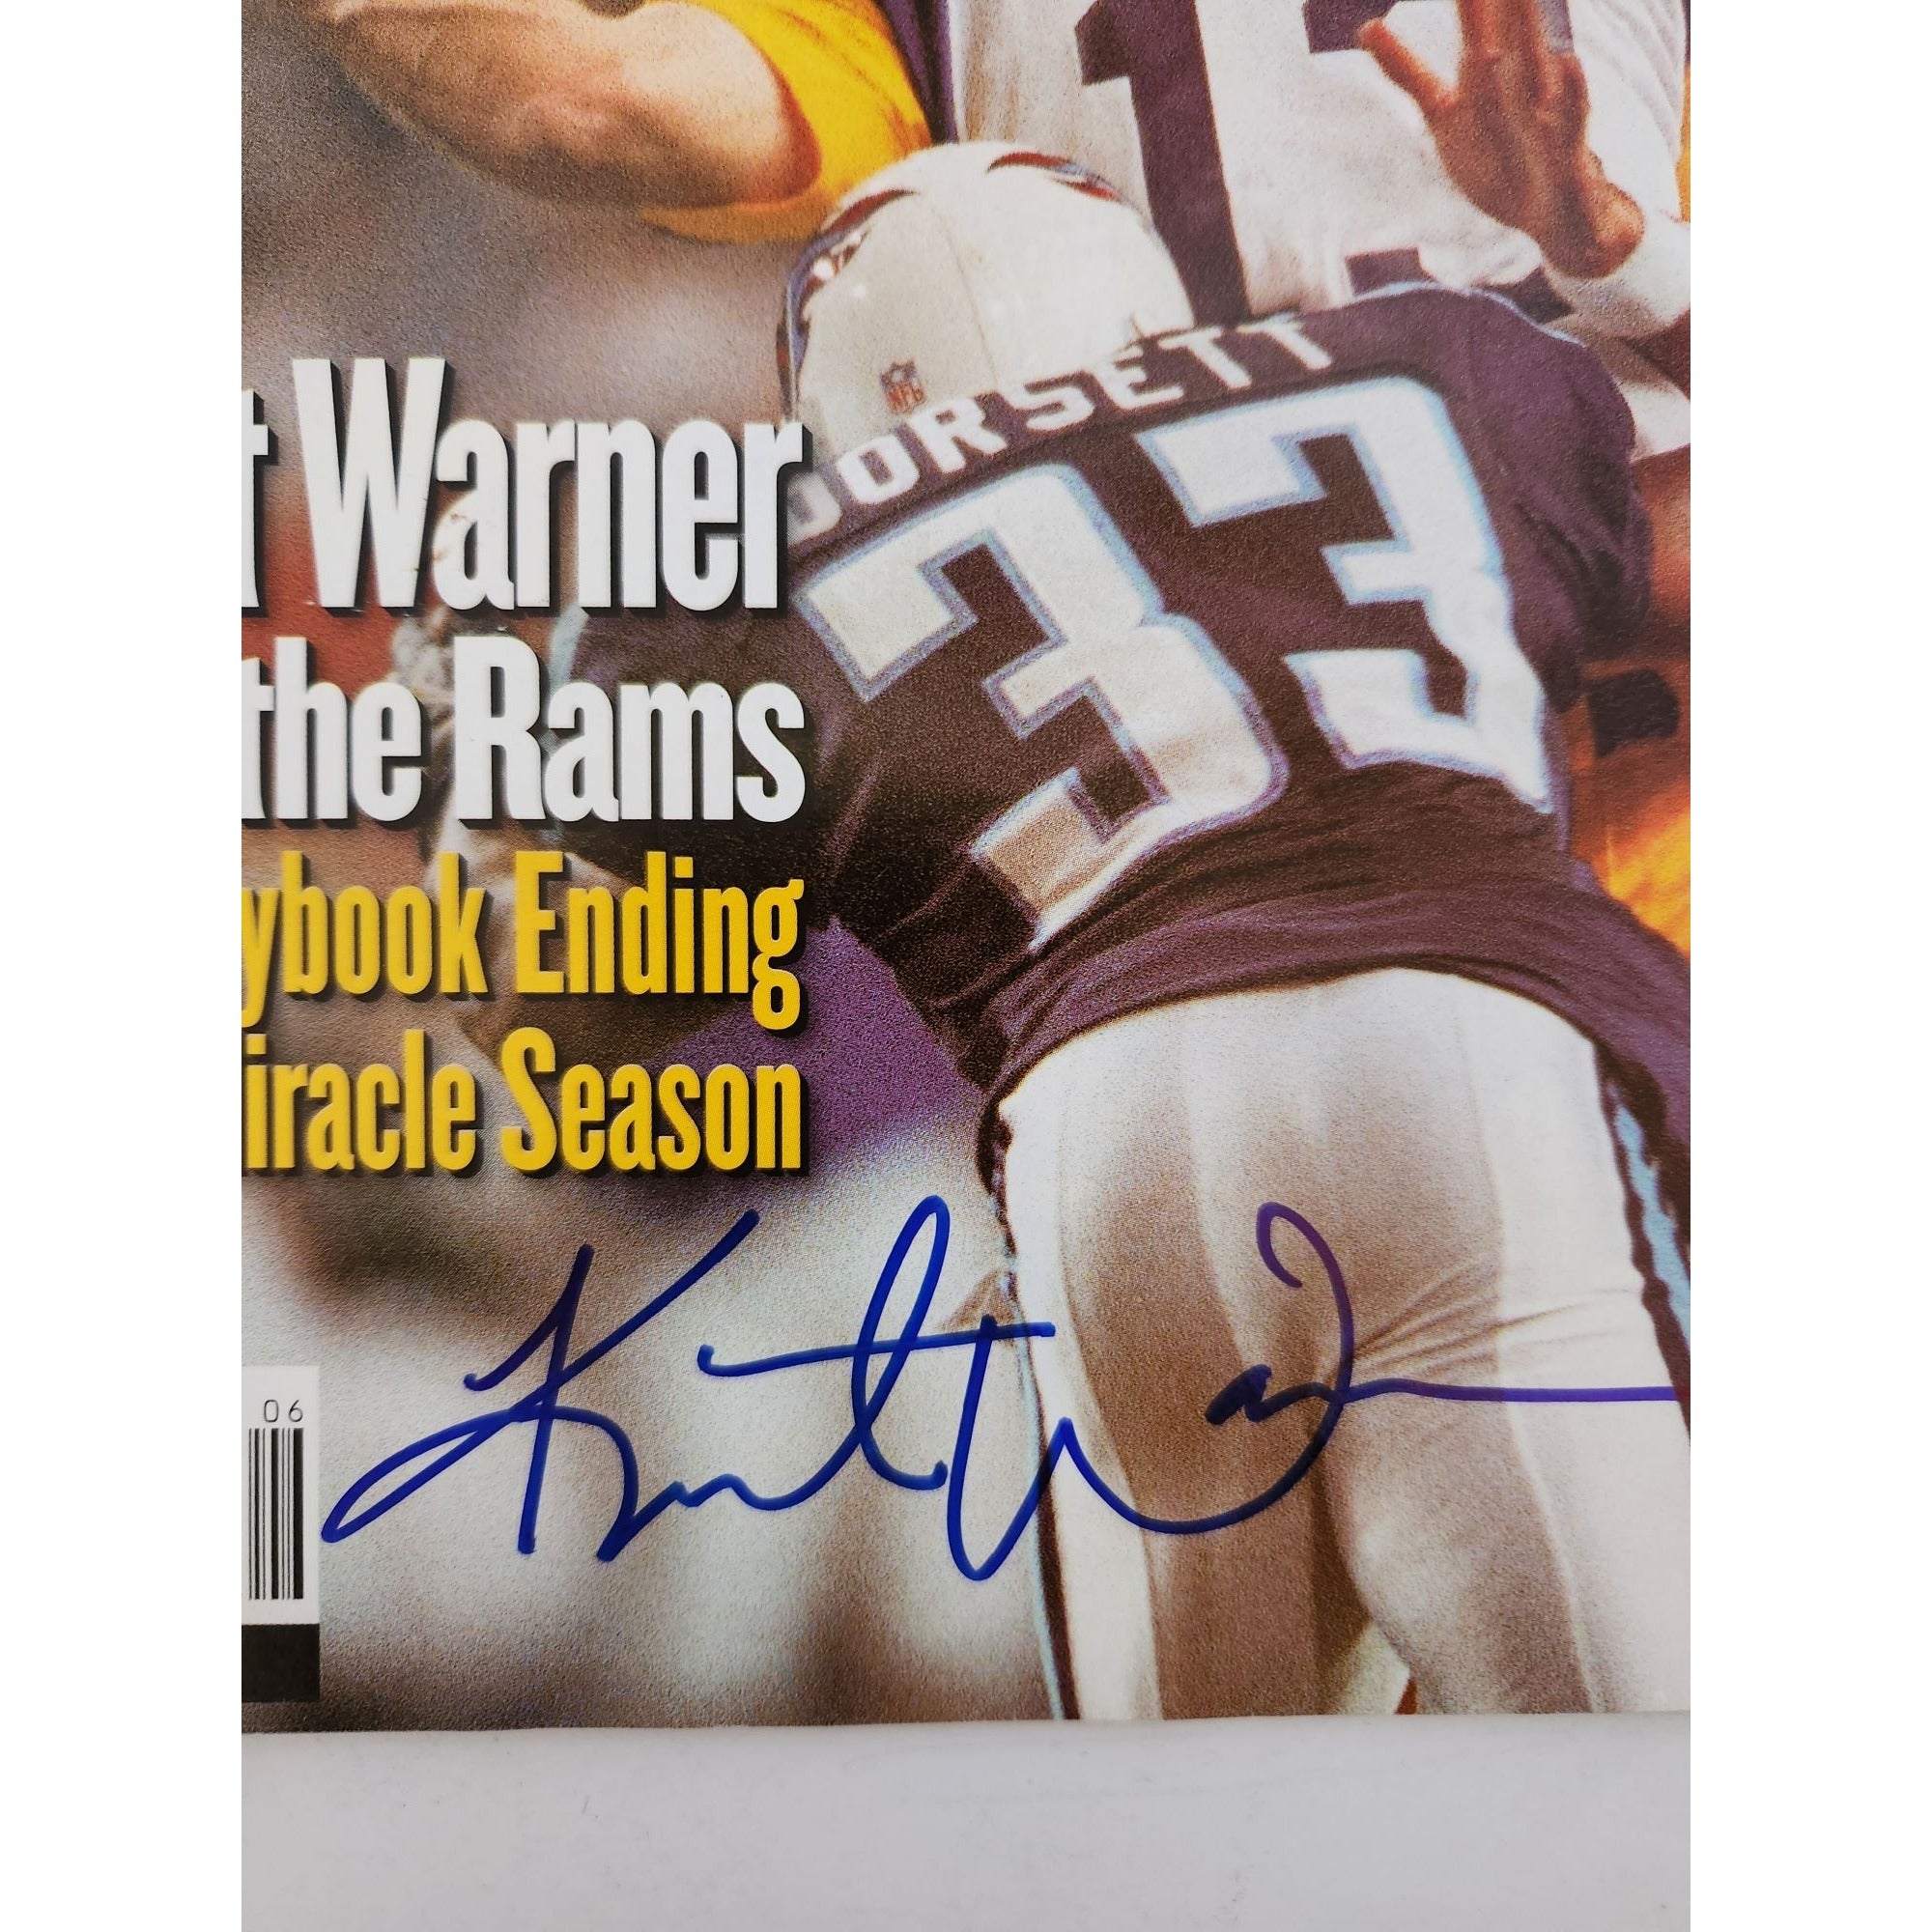 Kurt Warner St Louis Rams full Sports Illustrated magazine signed with proof